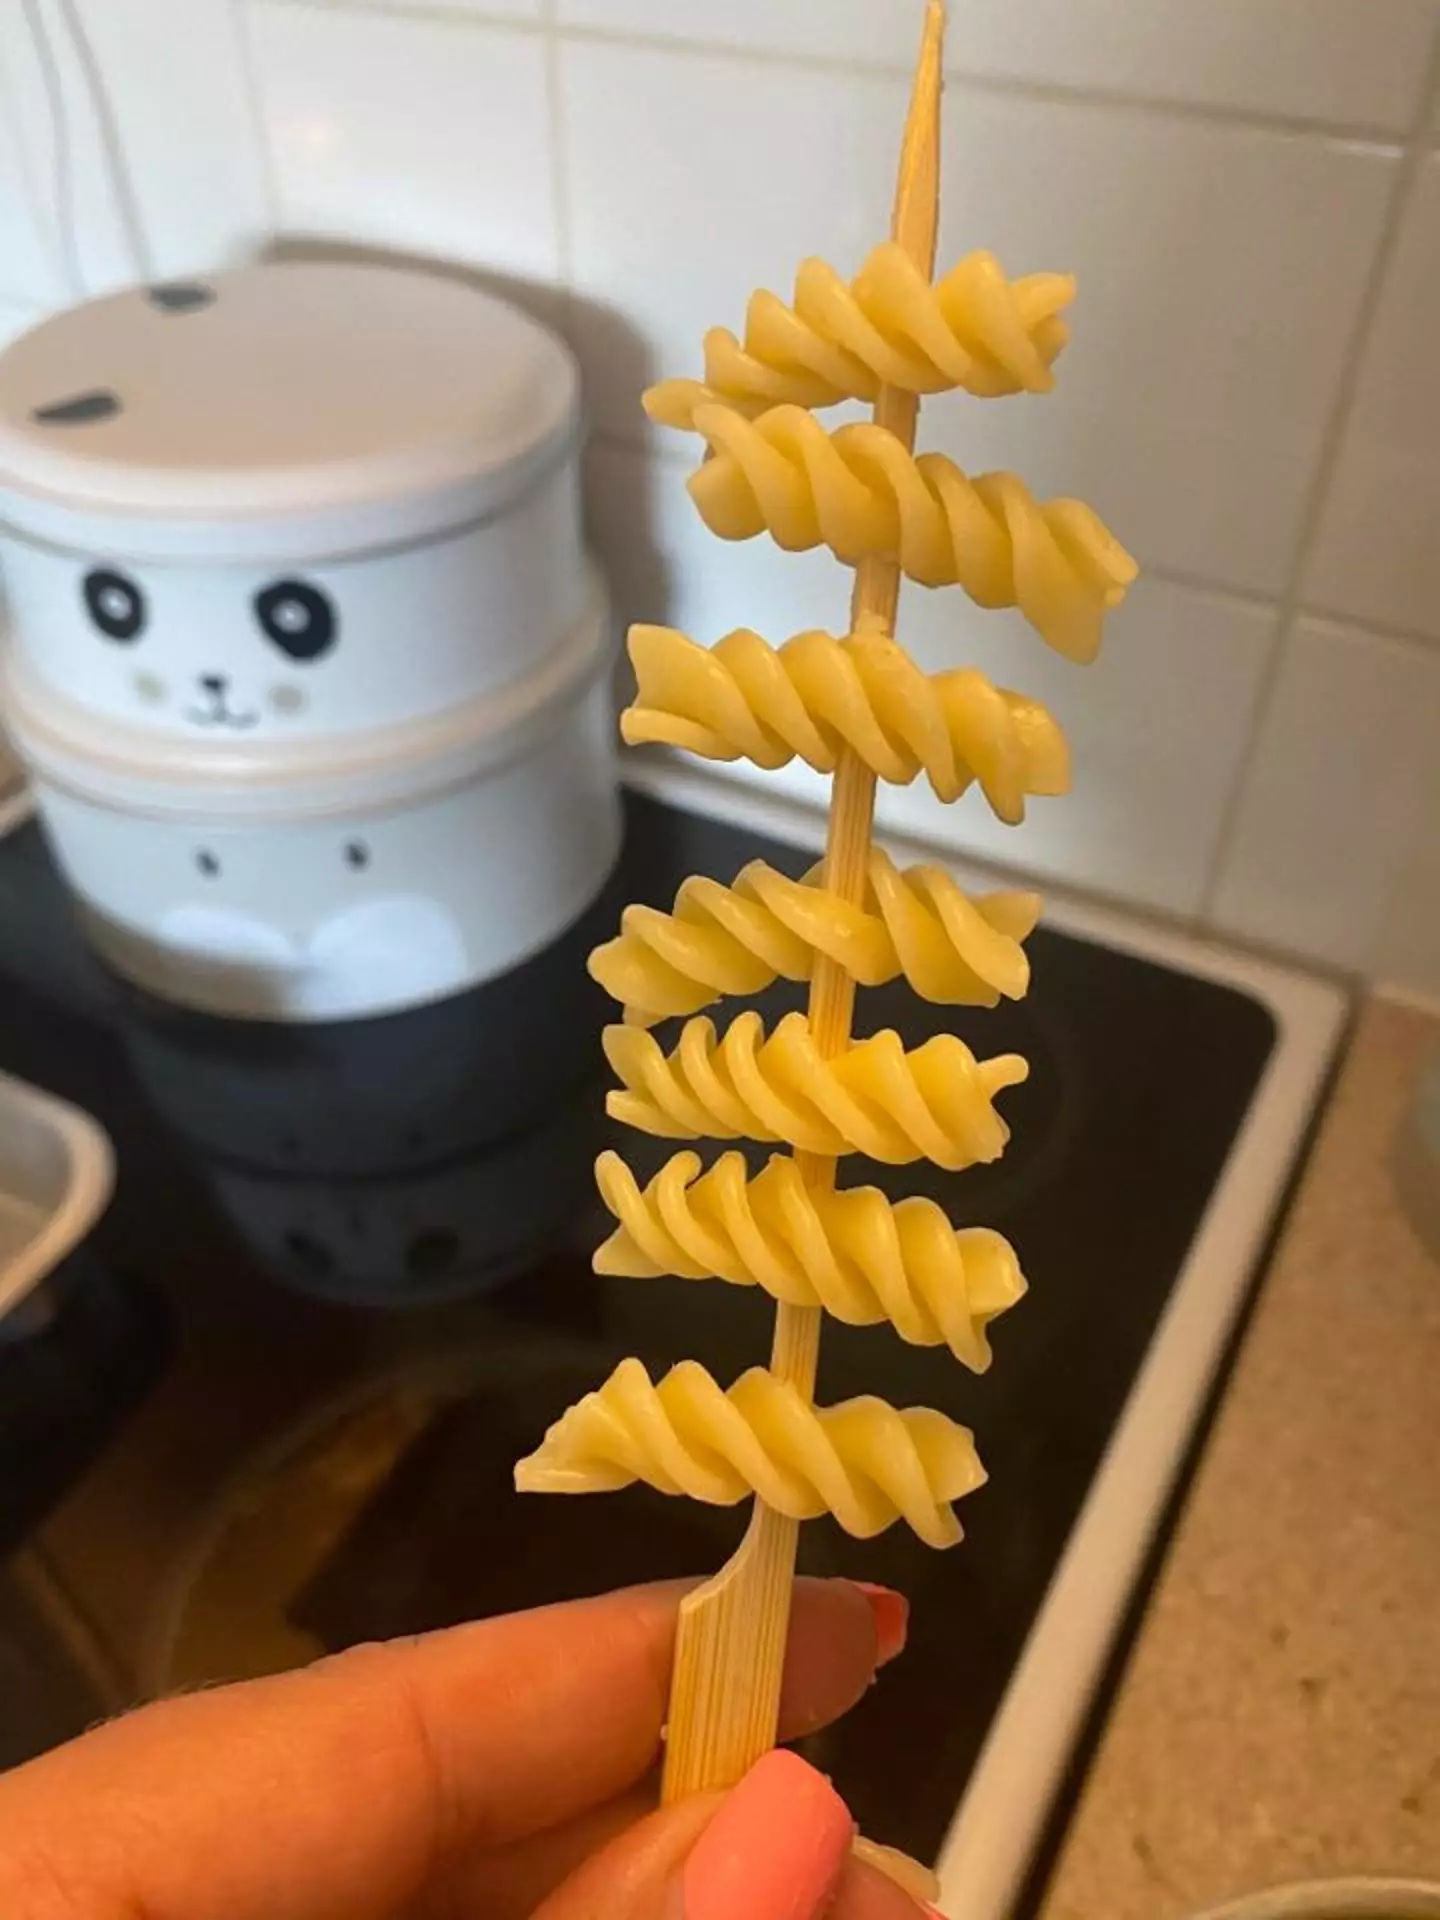 Simply skewer the pasta before adding sauce and cheese (